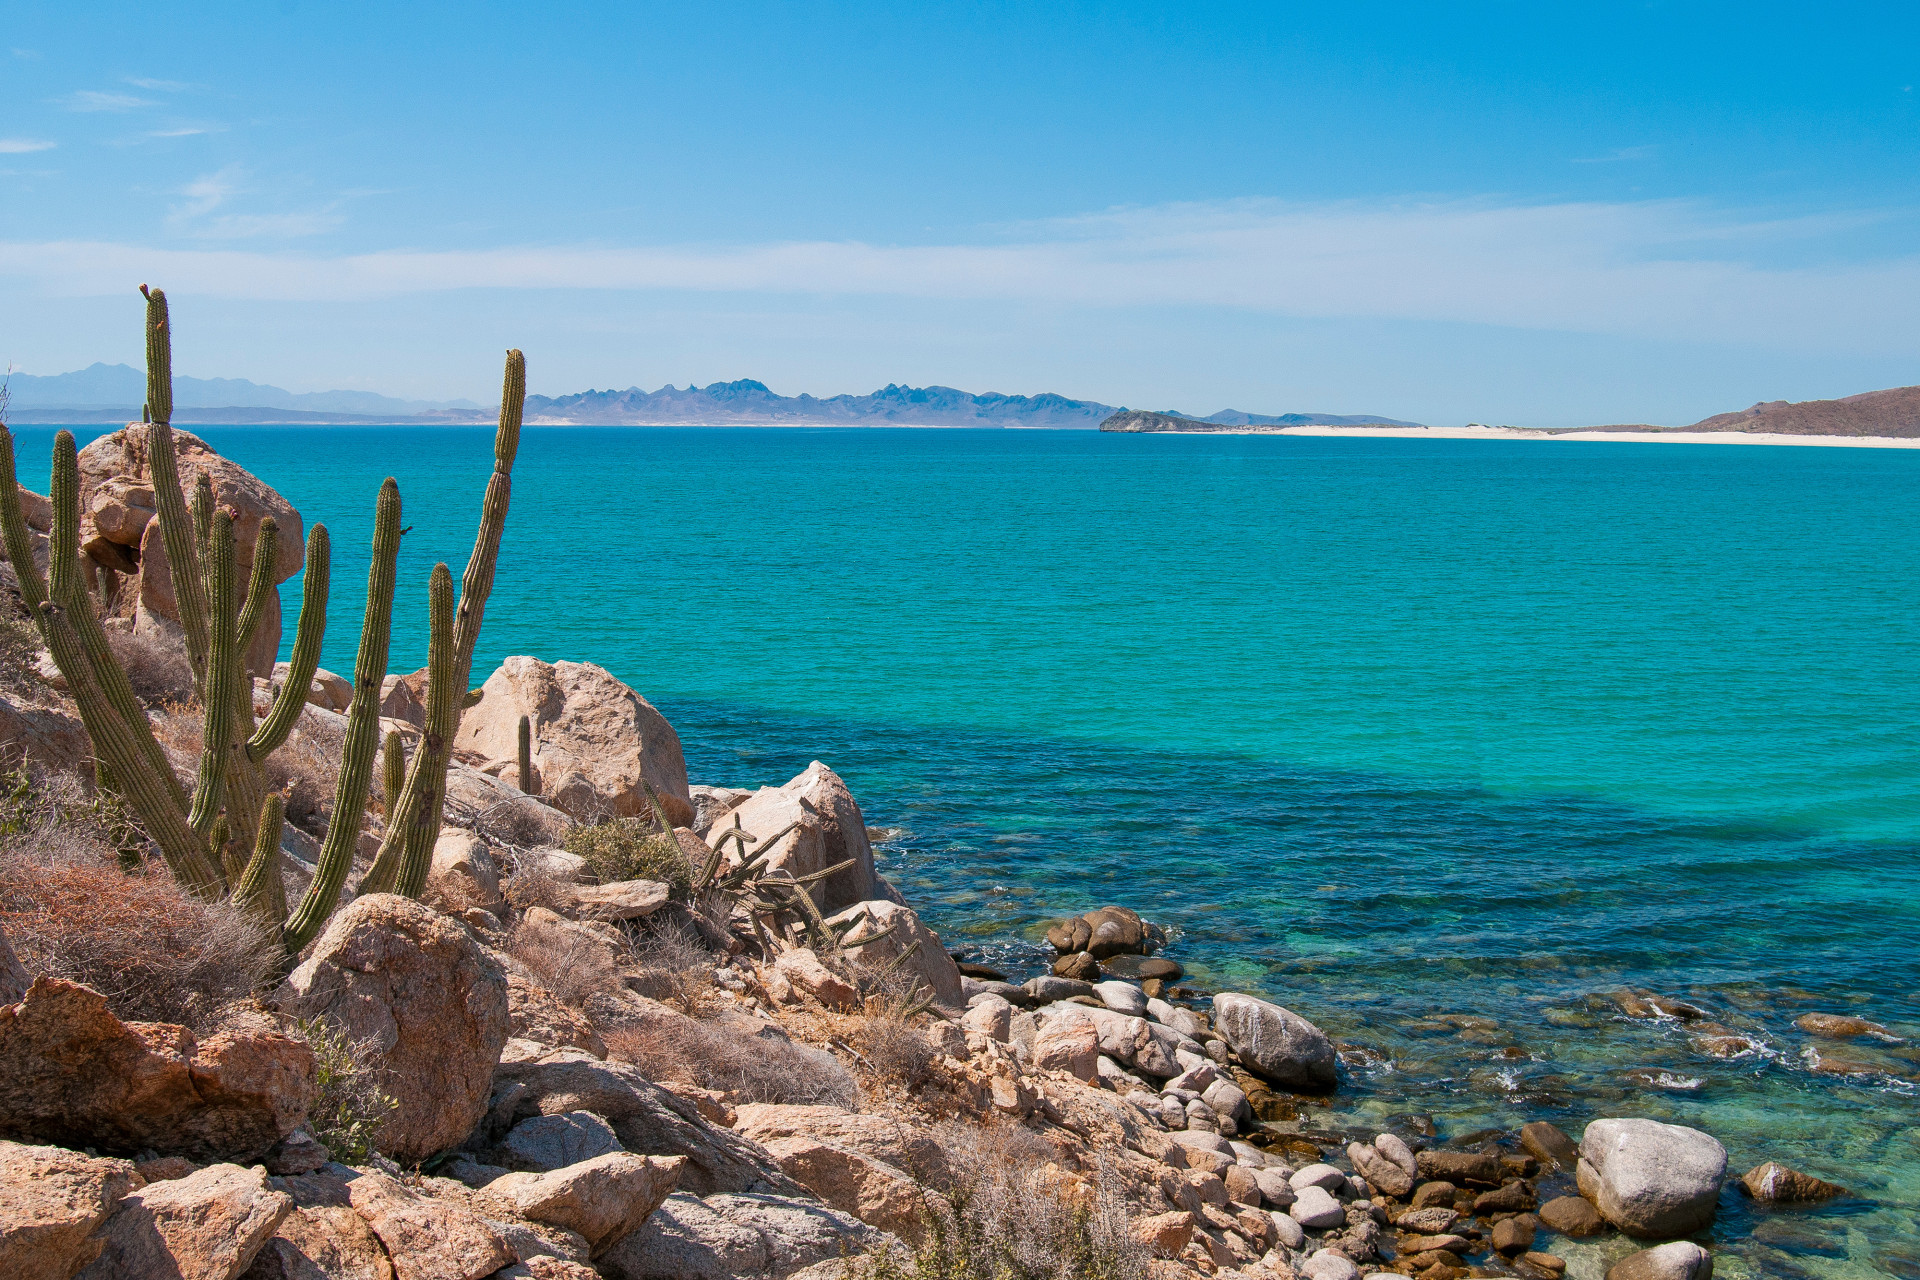 Although a little less known than its Bolivian counterpart, the Mexican city is a great destination for beach lovers.